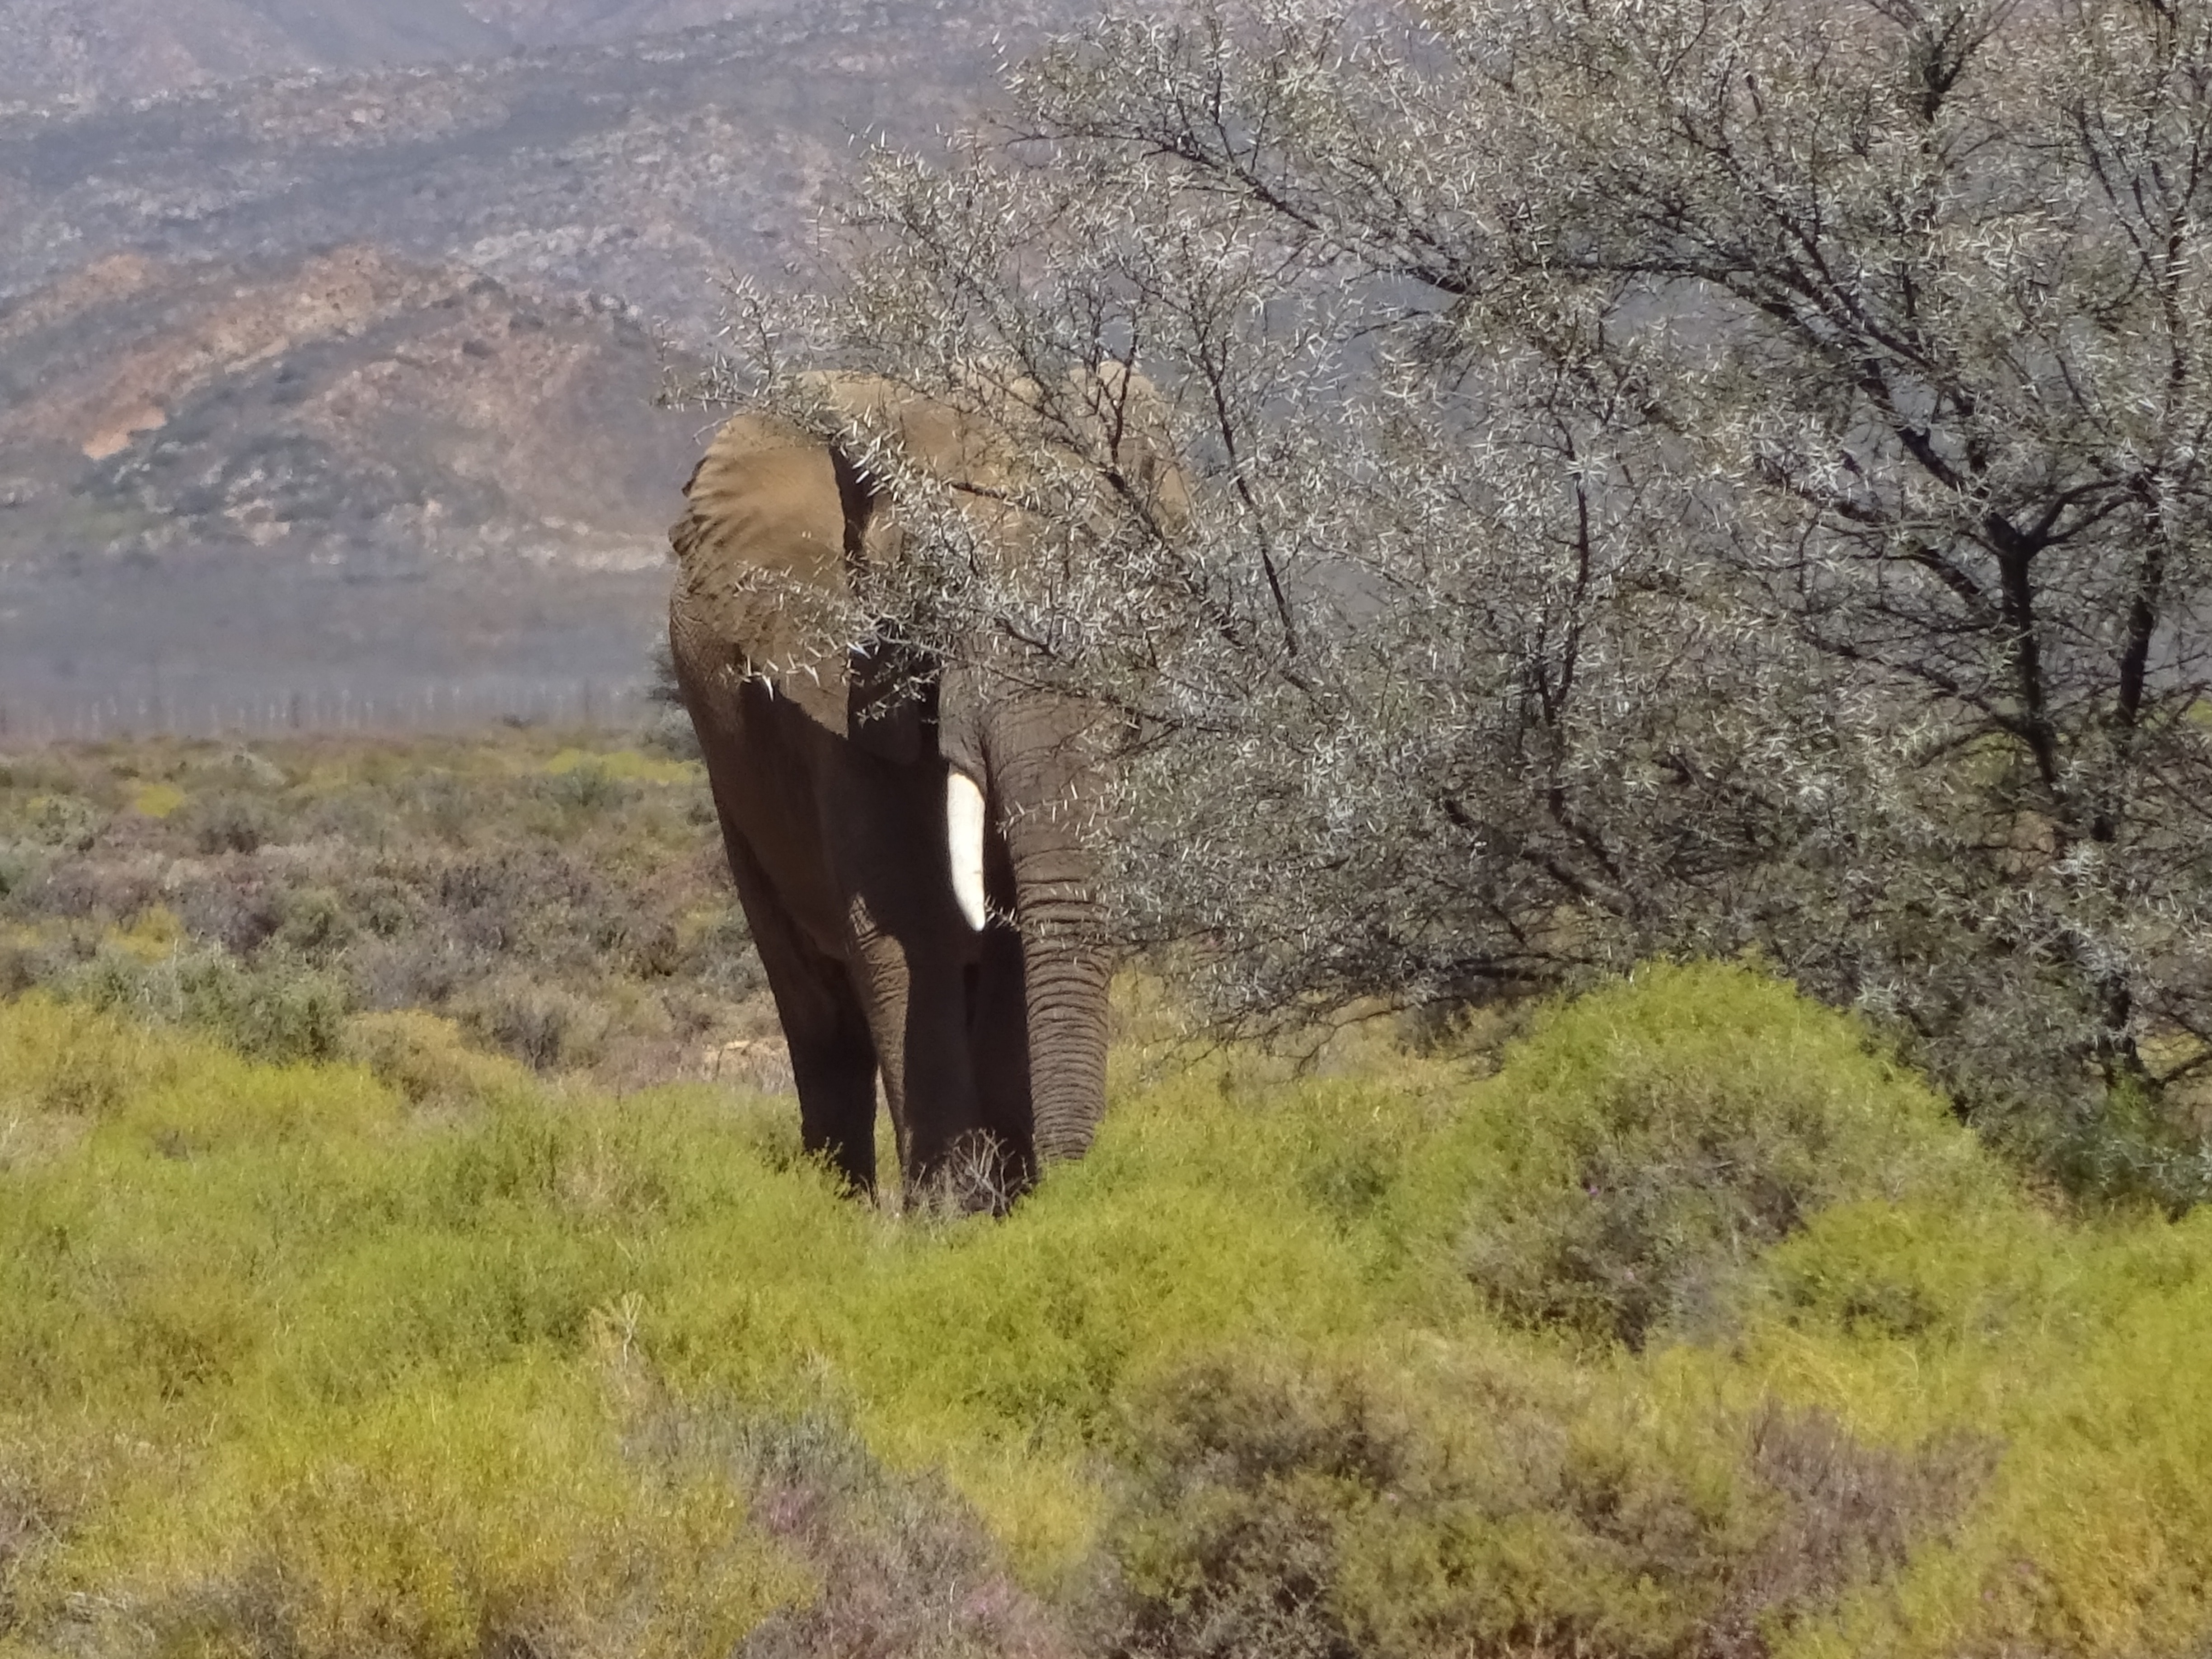 photo of elephant on grass beside bare trees